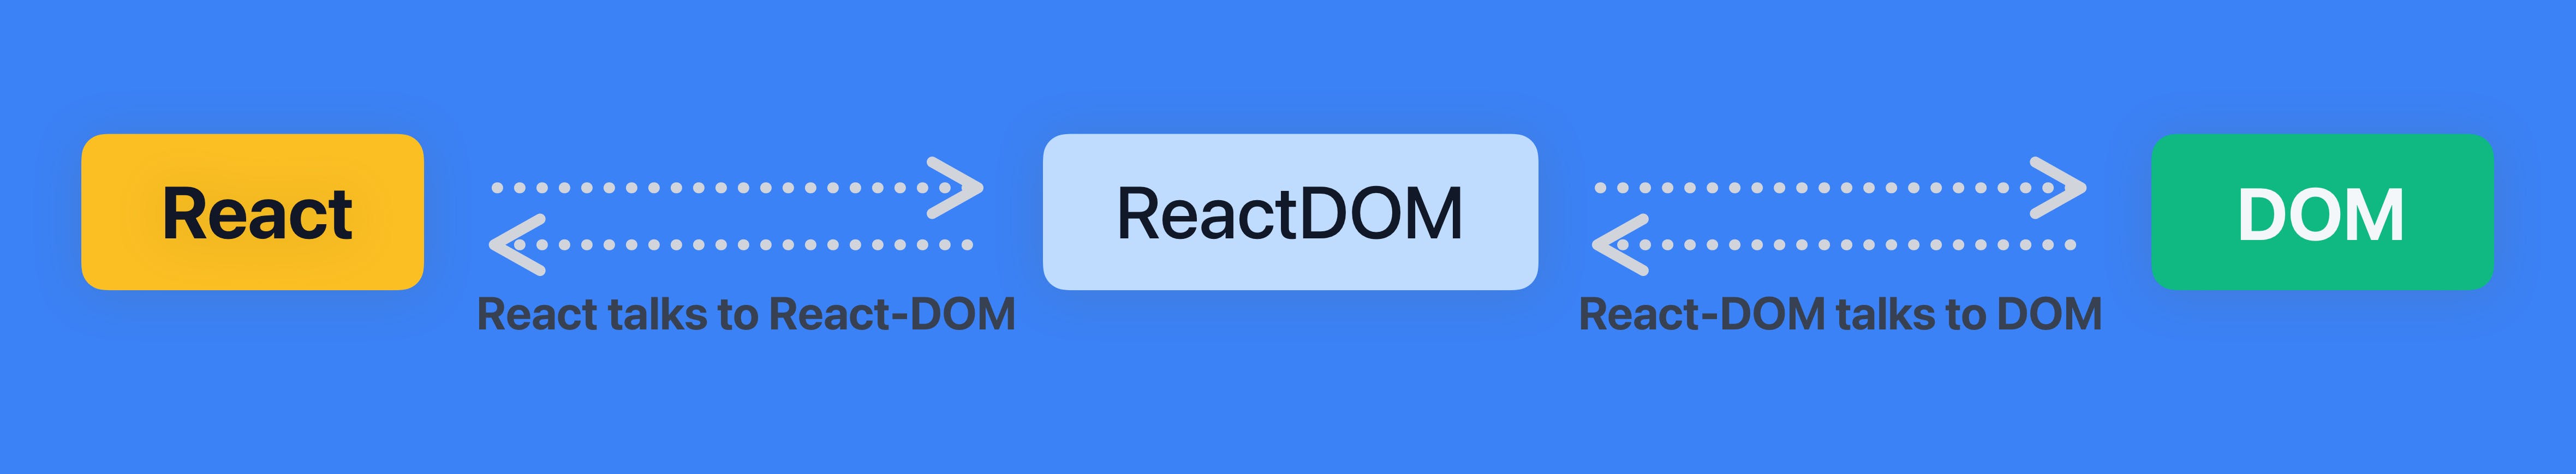 React_and_ReactDOM_Copy_3.png